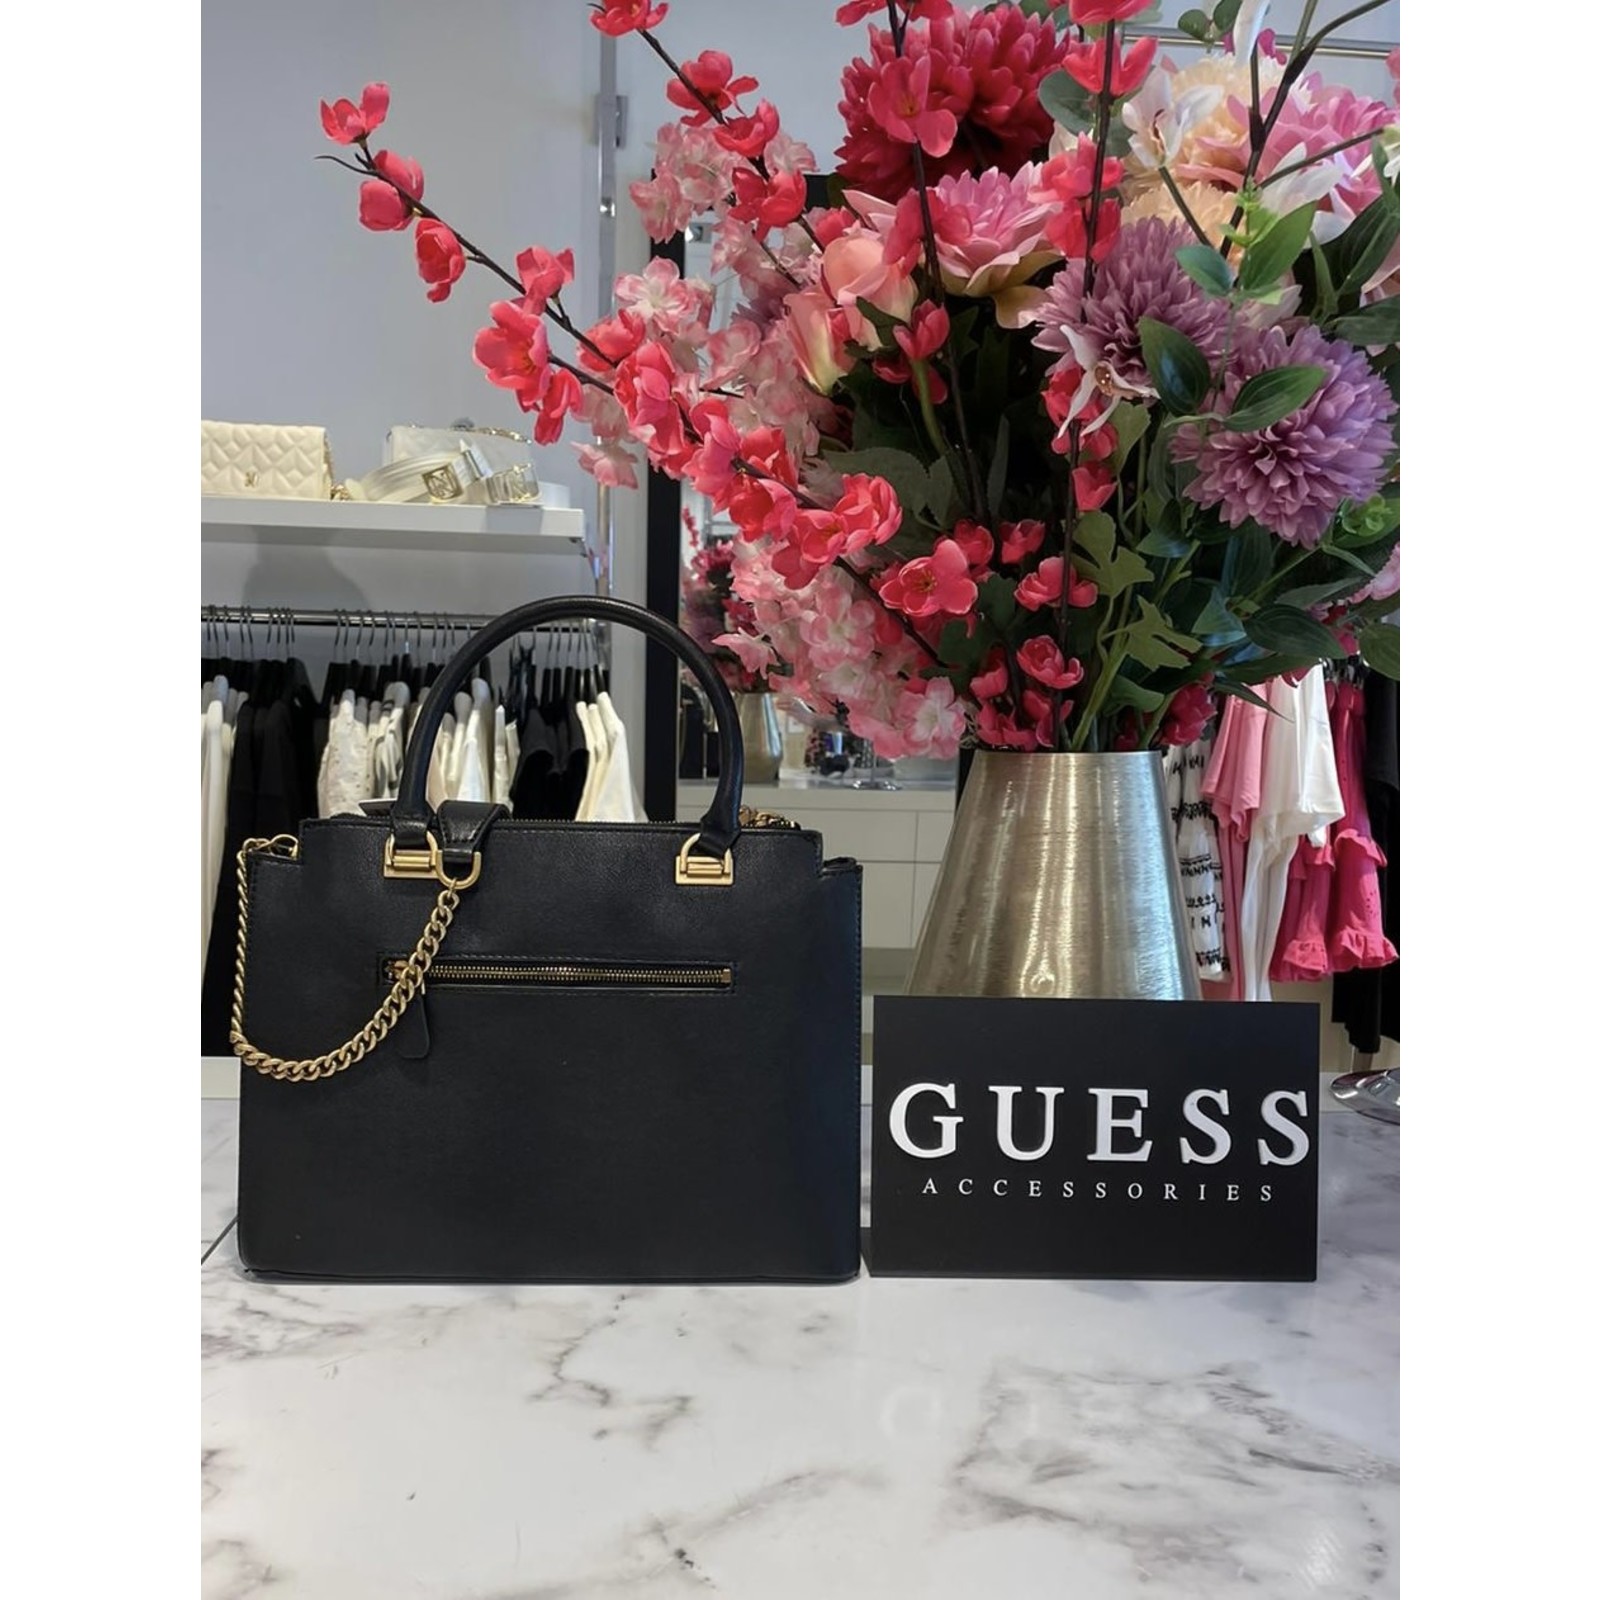 Guess Bag Centre Stage Big Black Guess